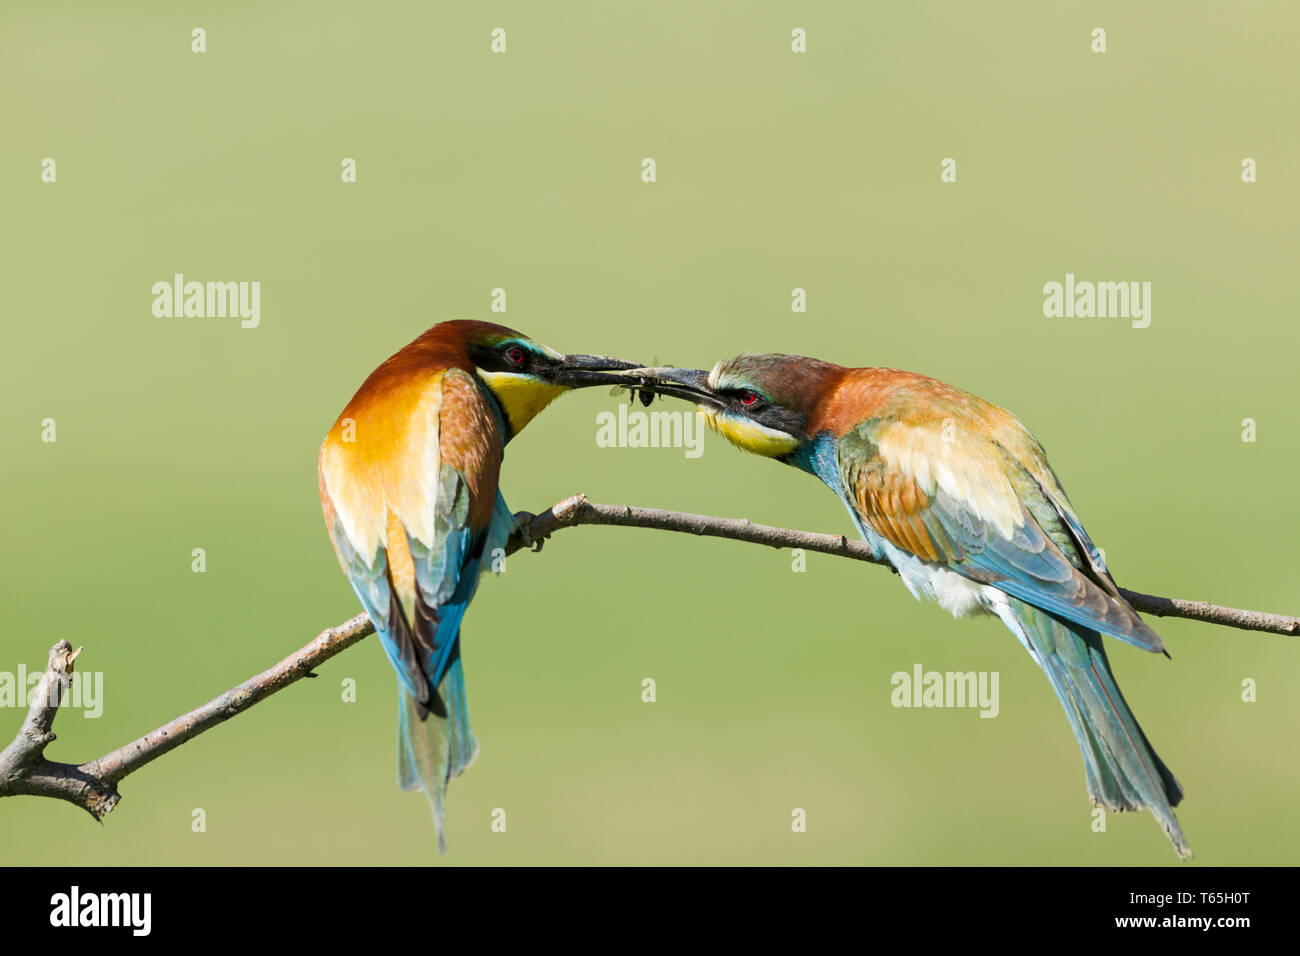 Male (left) and female (right)  European bee-eaters, Latin name Merops apiaster, perched on a branch in warm lighting showing courtship feeding Stock Photo